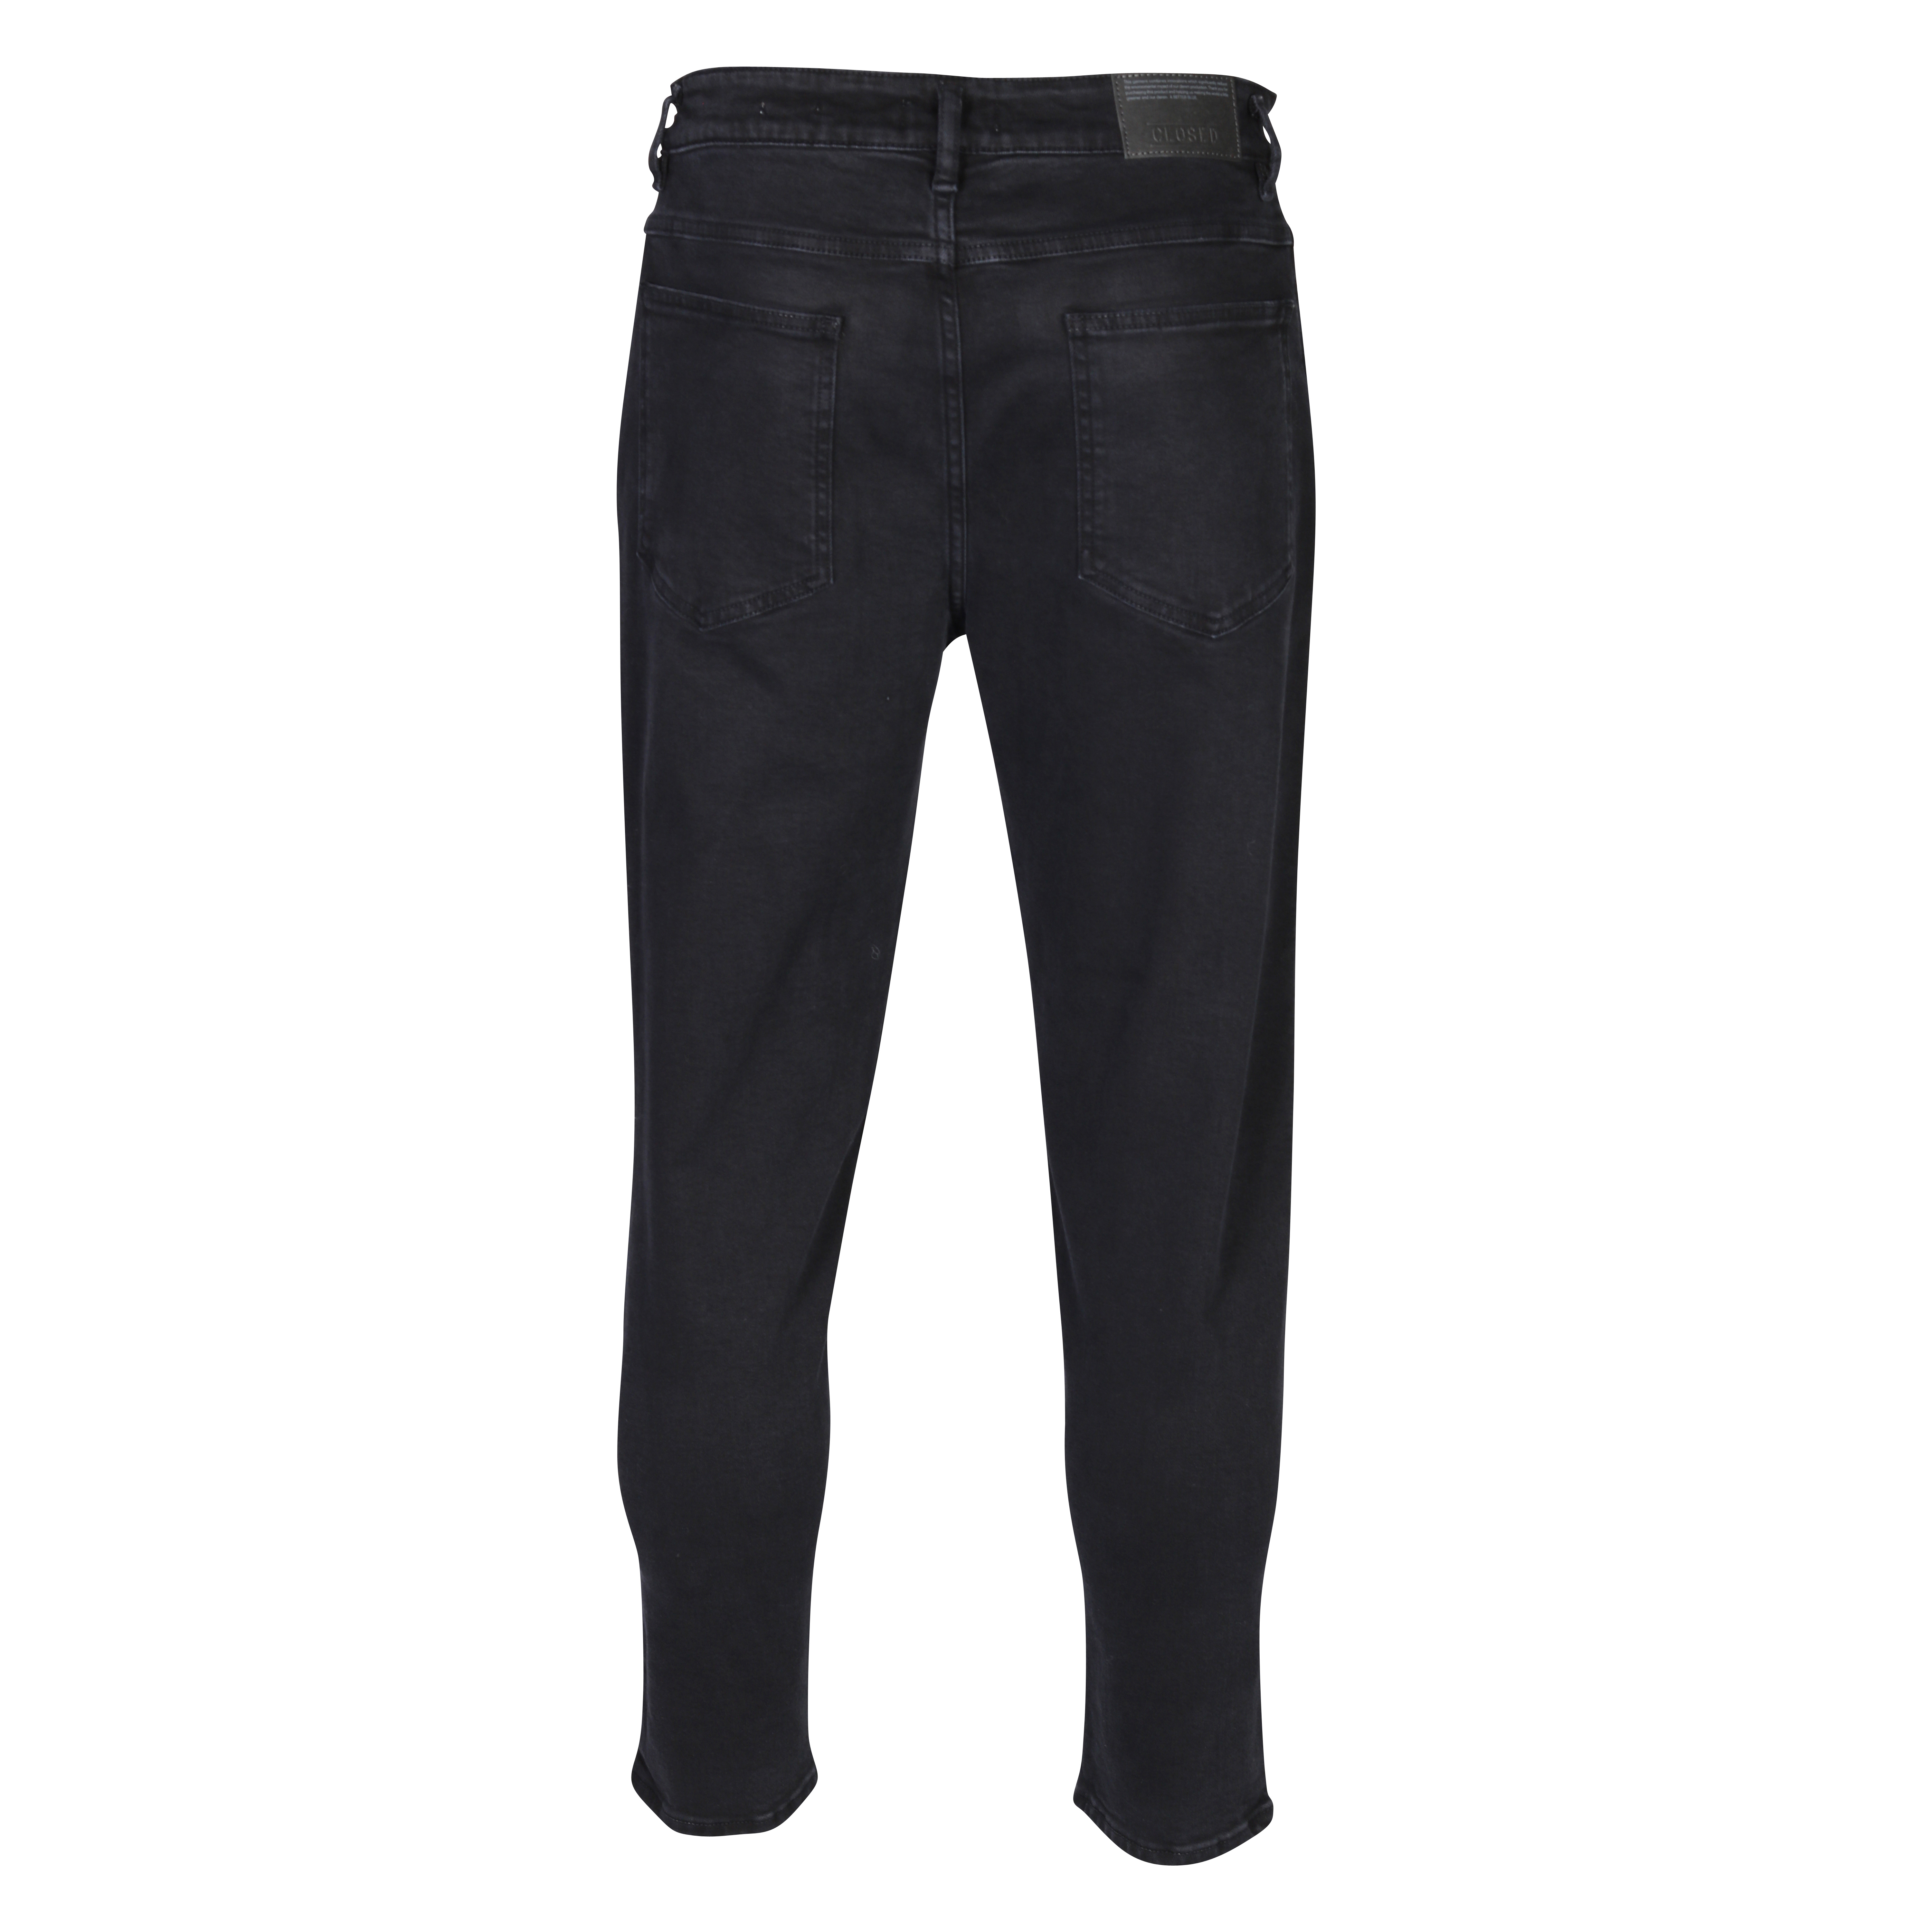 CLOSED X-Lent Tapered Jeans in Black 32